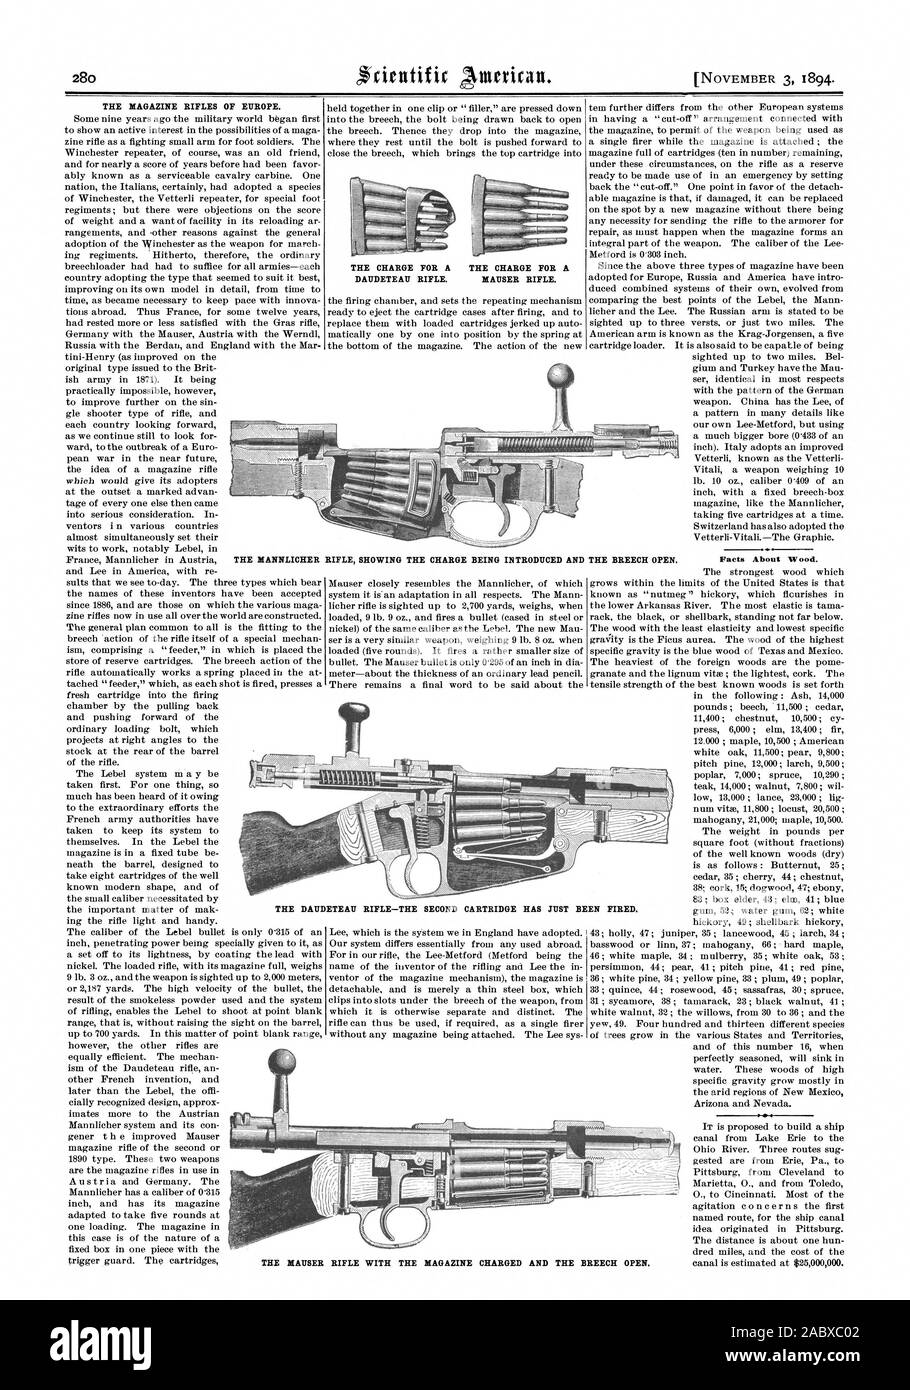 THE MAGAZINE RIFLES OF EUROPE. THE CHARGE FOR A THE CHARGE FOR A DAUDETEAU RIFLE. DIALTSER RIFLE. Facts About Wood. THE ItANNLICHER RIFLE SHOWING THE CHARGE BEING INTRODUCED AND THE BREECH OPEN. THE DAUDETEAU RIFLE—THE SECOND CARTRIDGE HAS JUST BE EN FIRED. THE MAUER RIFLE WITH THE MAGAZINE CHARGED AND THE B REECH OPEN., scientific american, 1894-11-03 Stock Photo